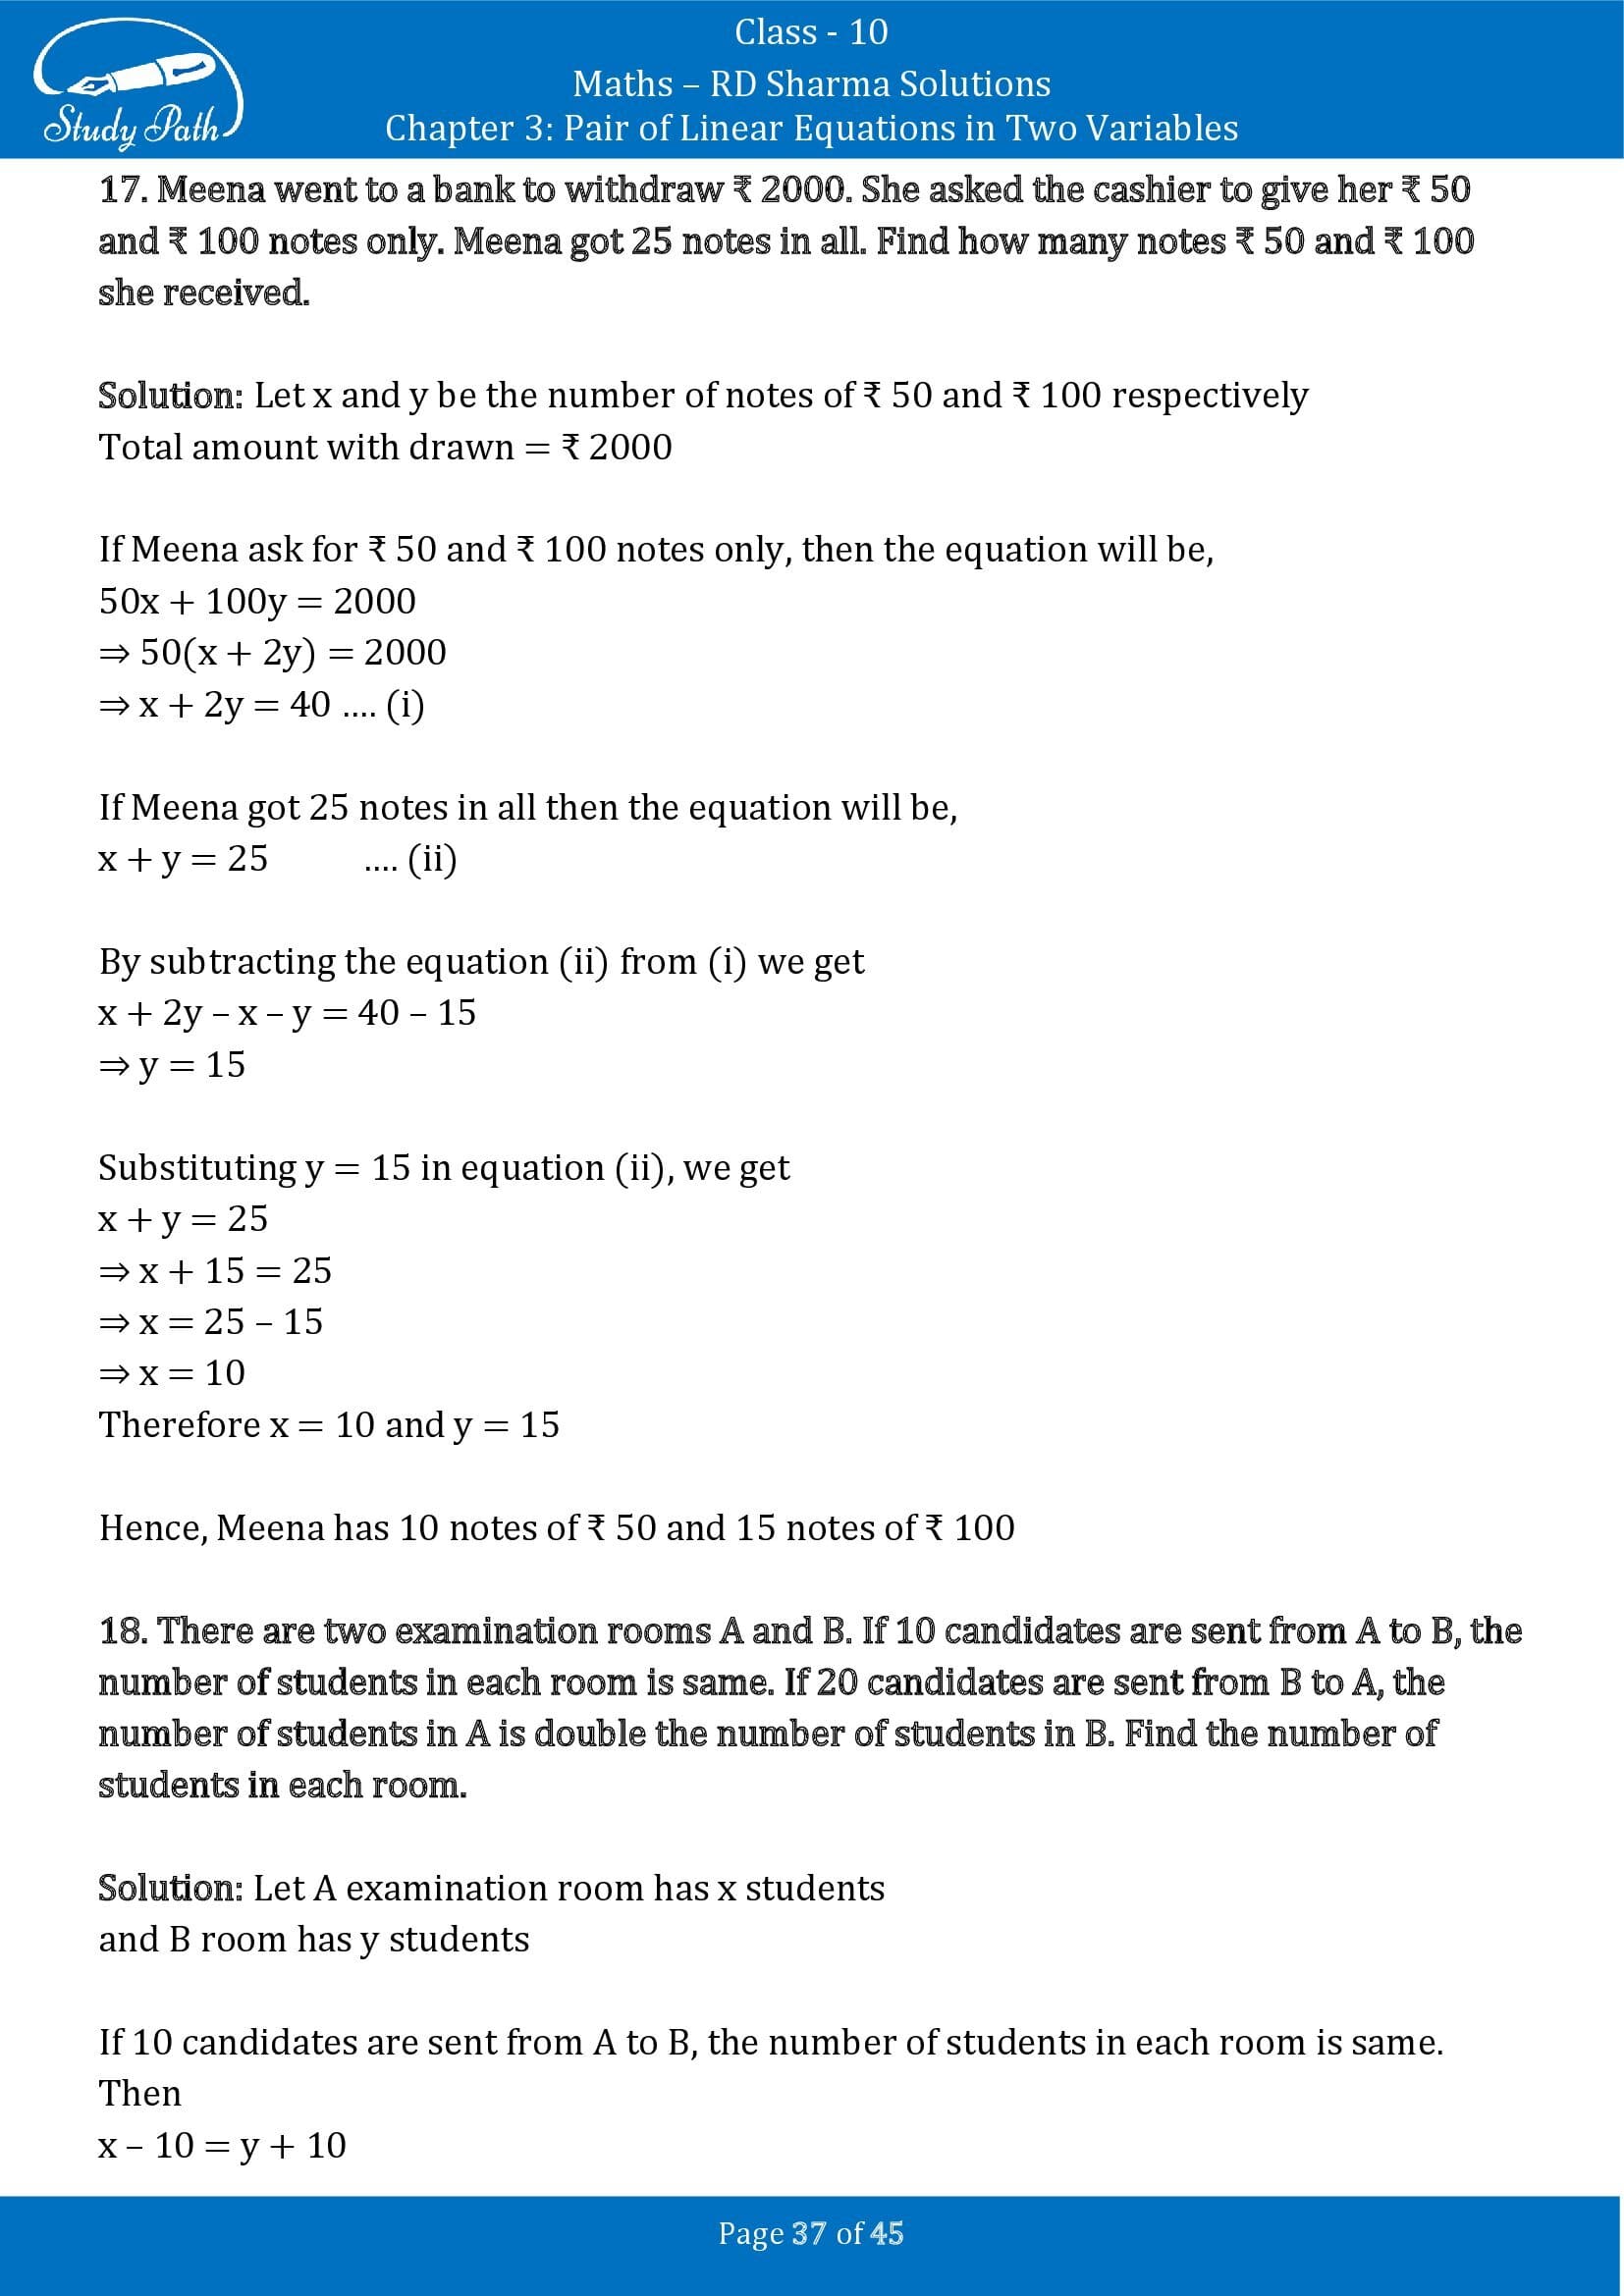 RD Sharma Solutions Class 10 Chapter 3 Pair of Linear Equations in Two Variables Exercise 3.11 00037